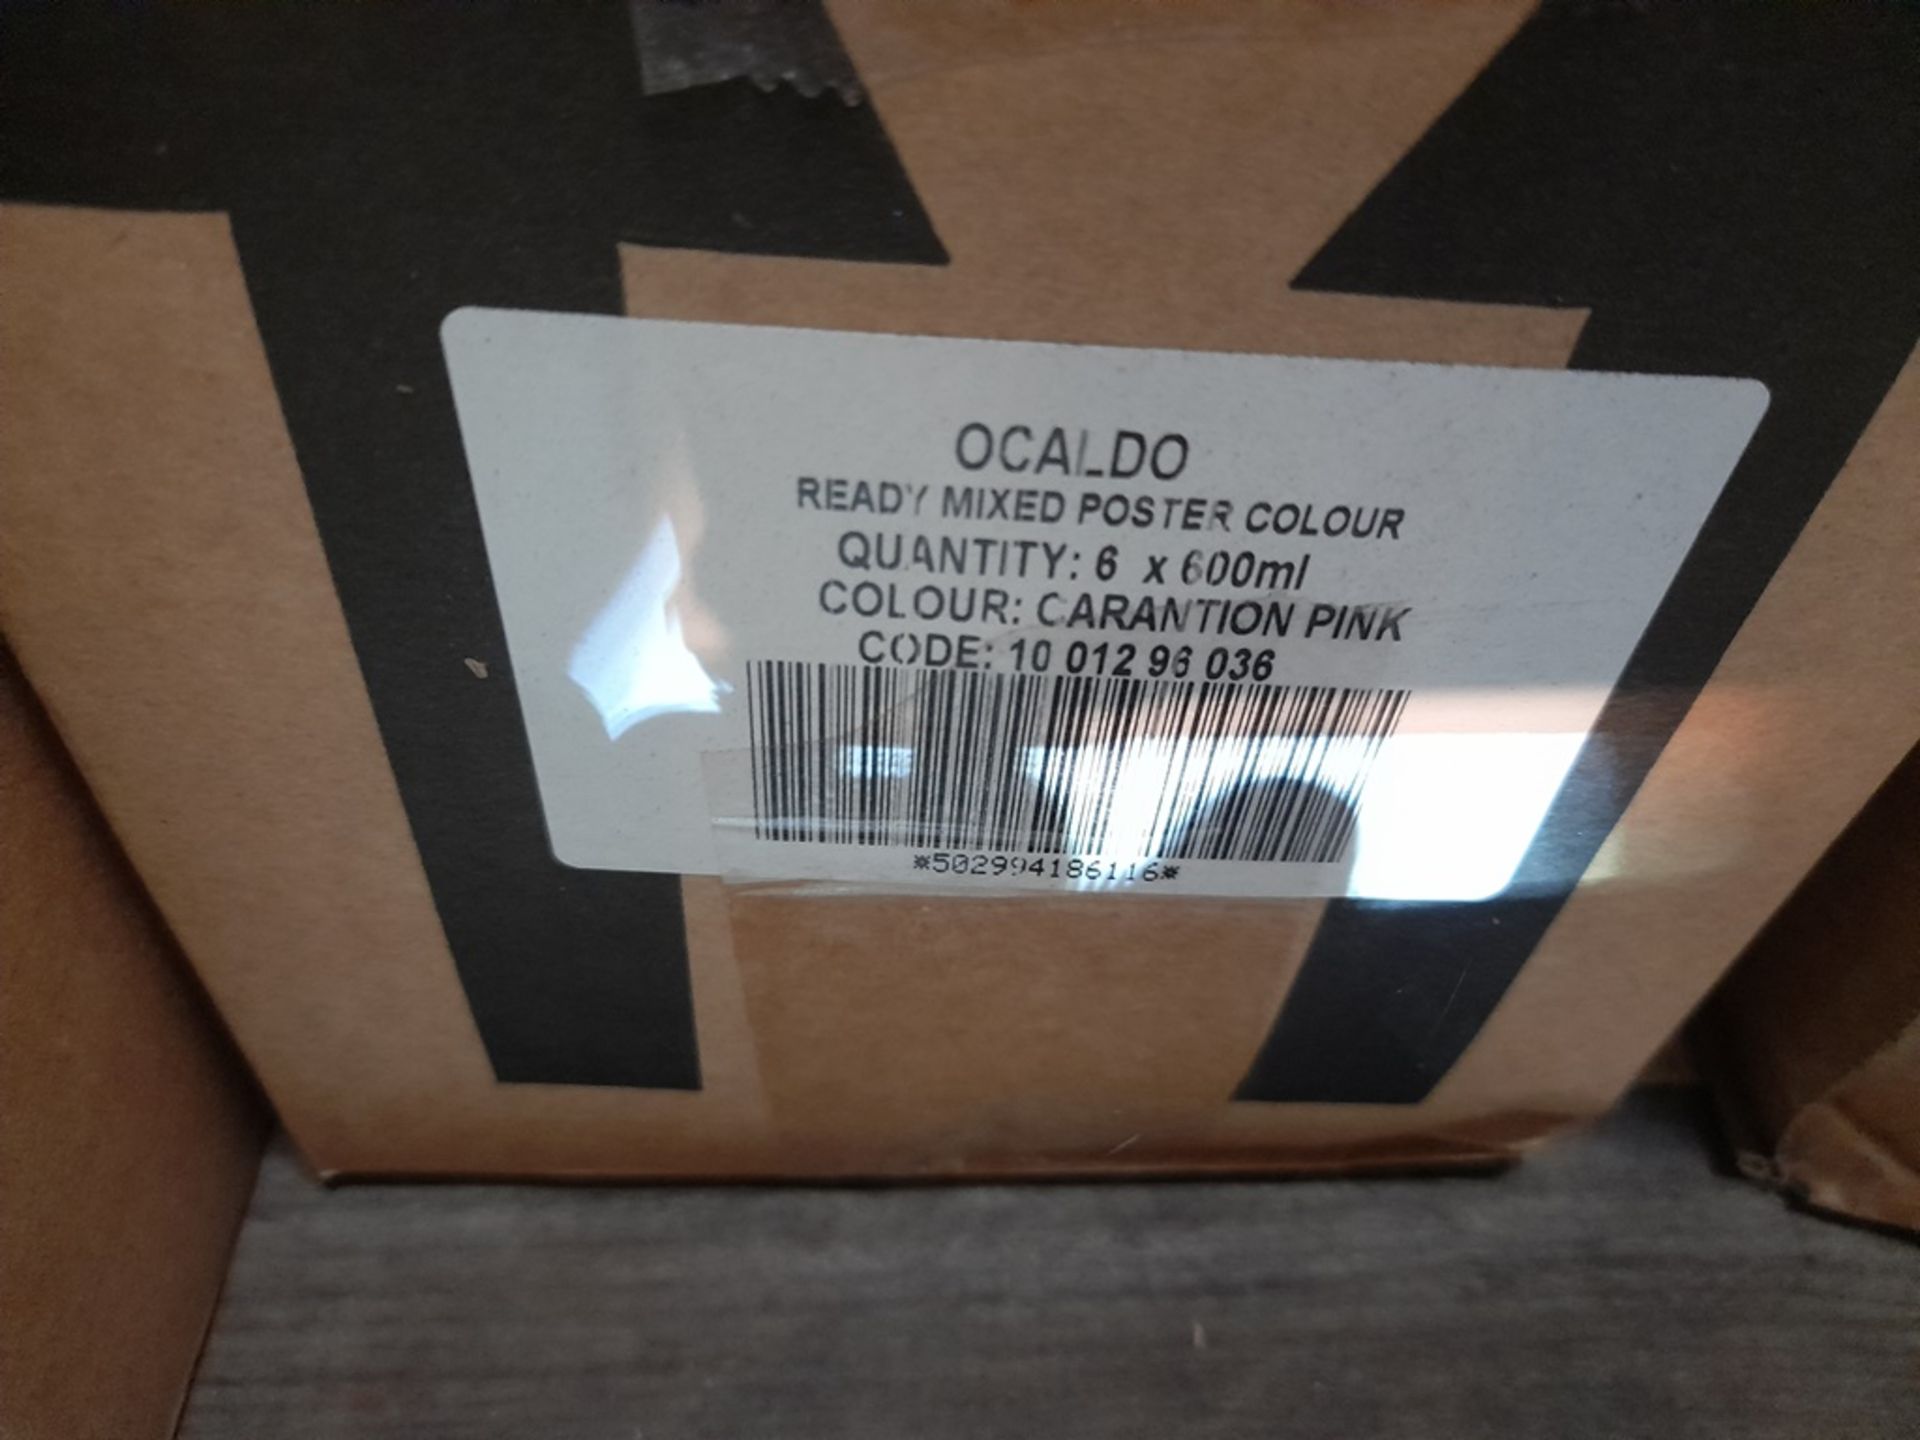 2 Pallets of Ocaldo Ready Mixed Poster colour, 12 x 300ml box, various colours - lilac, green, pink, - Image 7 of 7